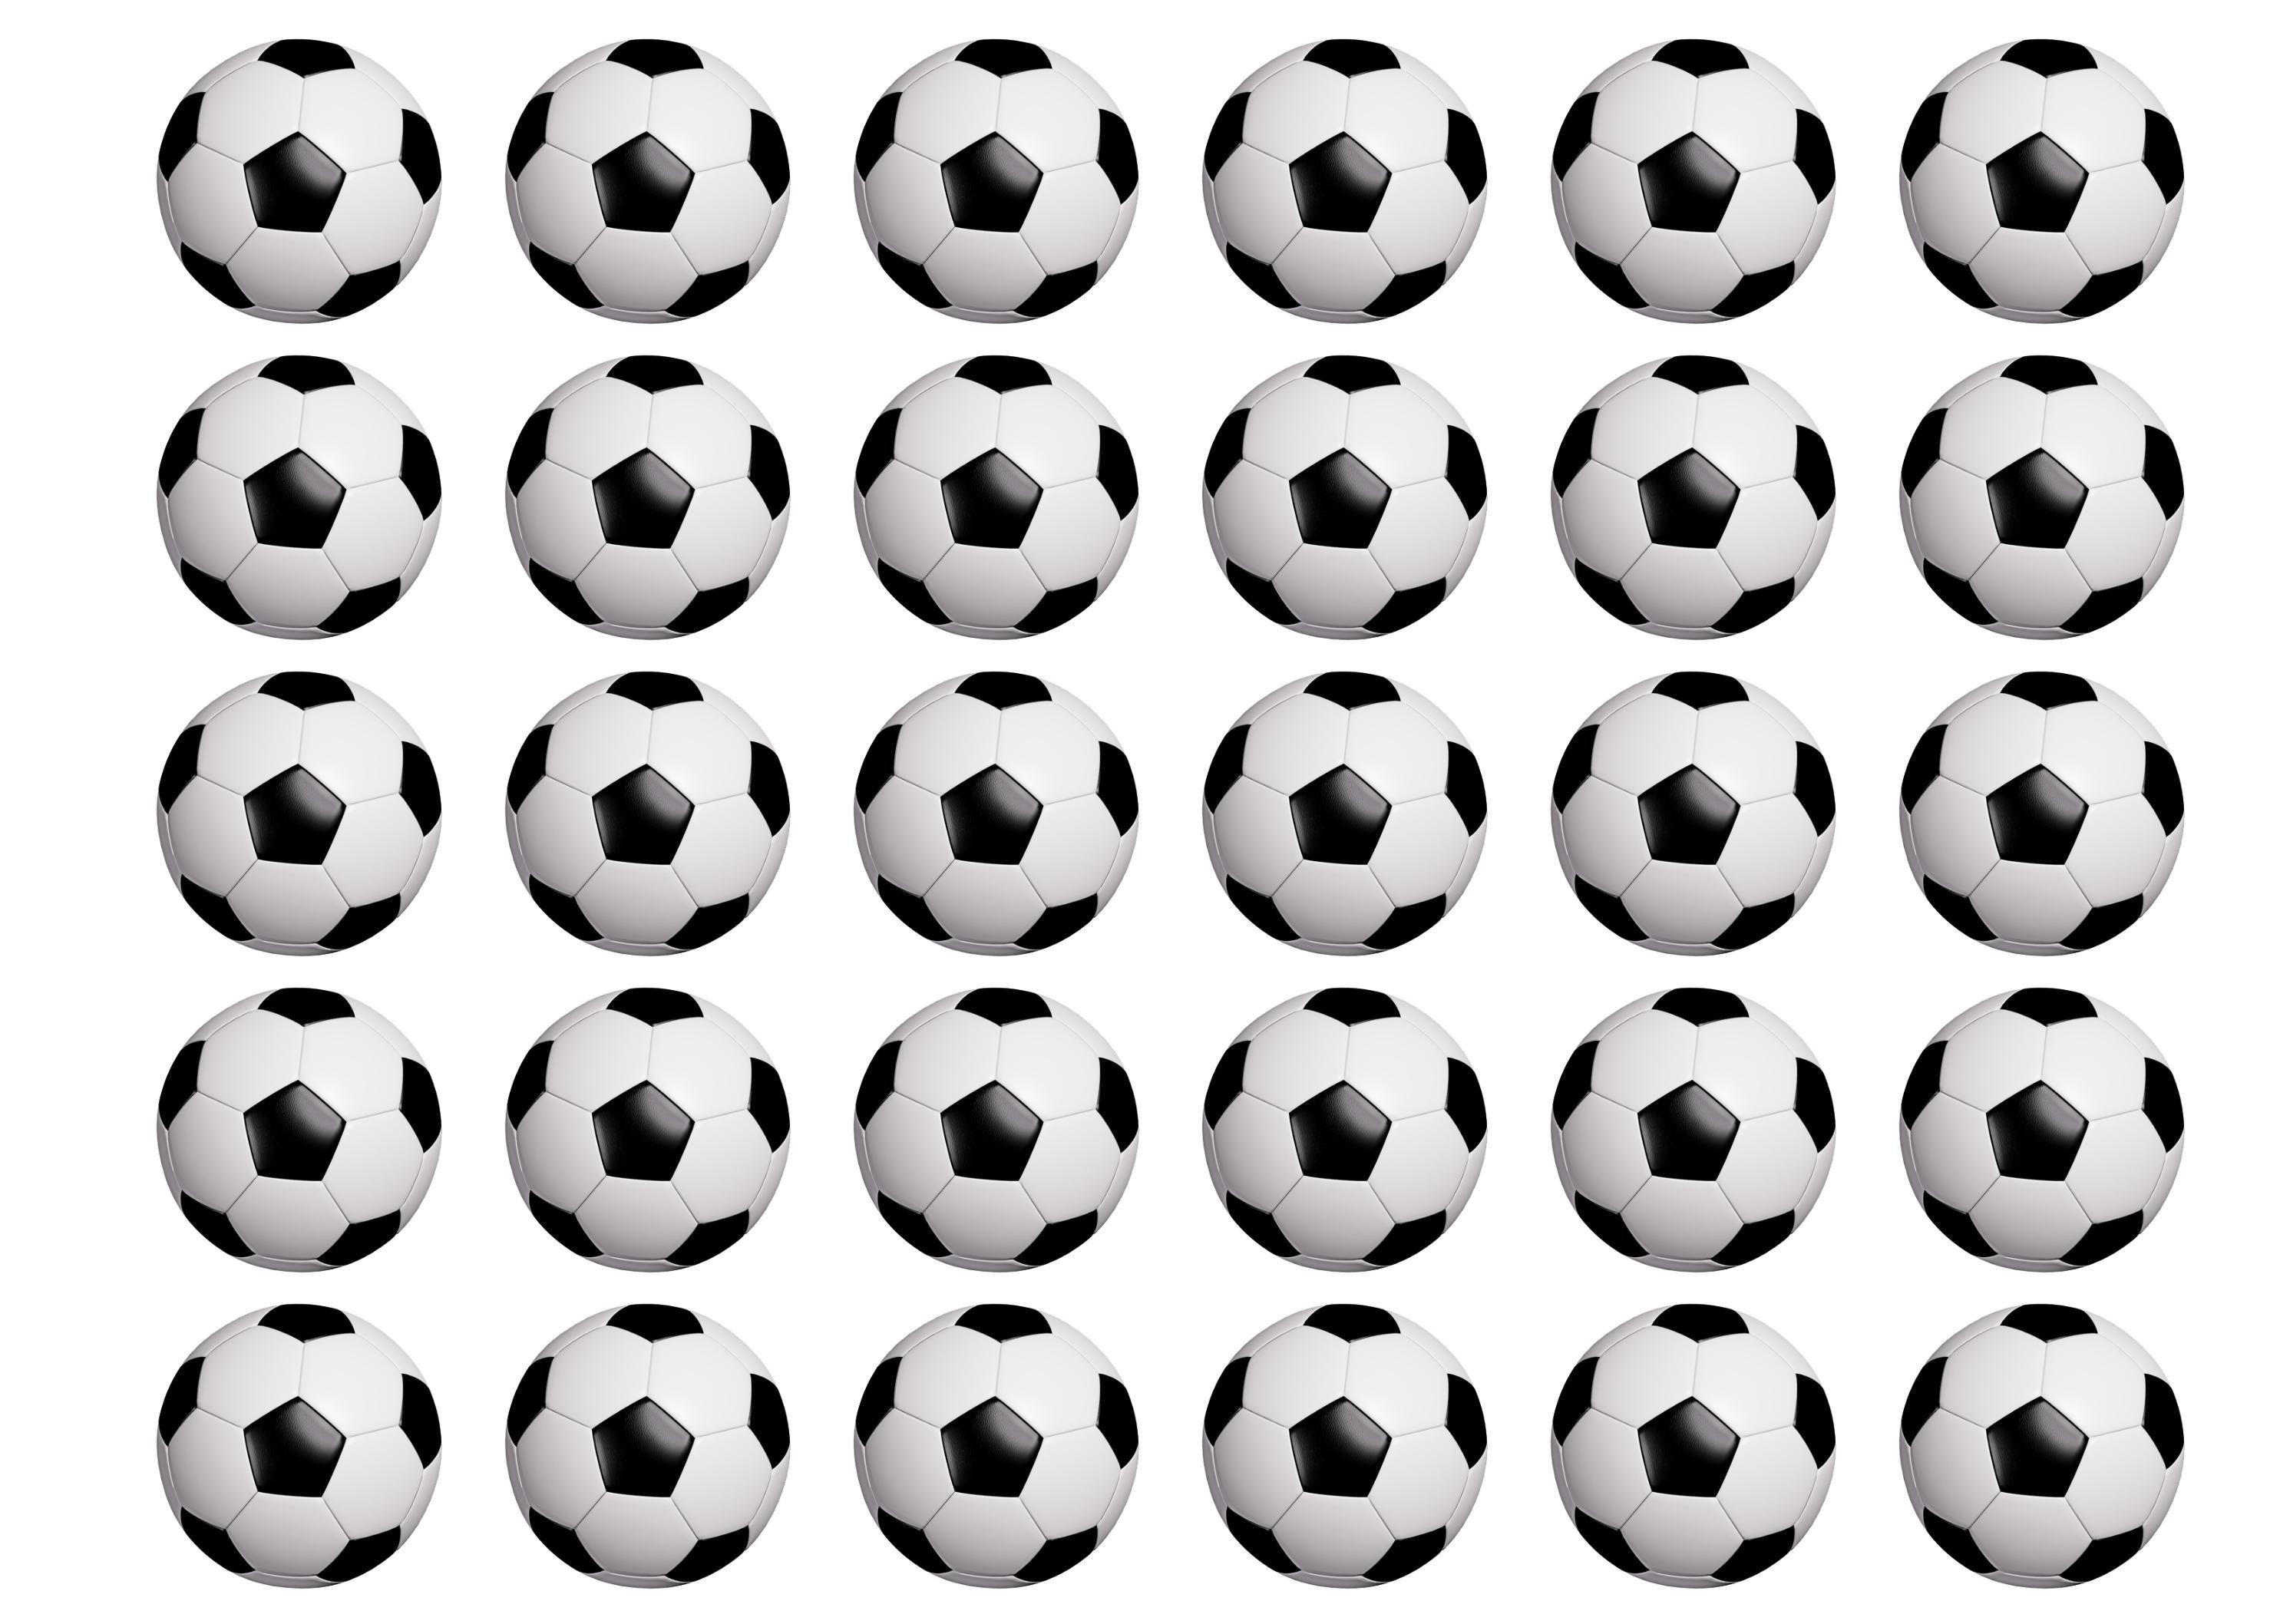 30 edible cupcake toppers with a black and white football